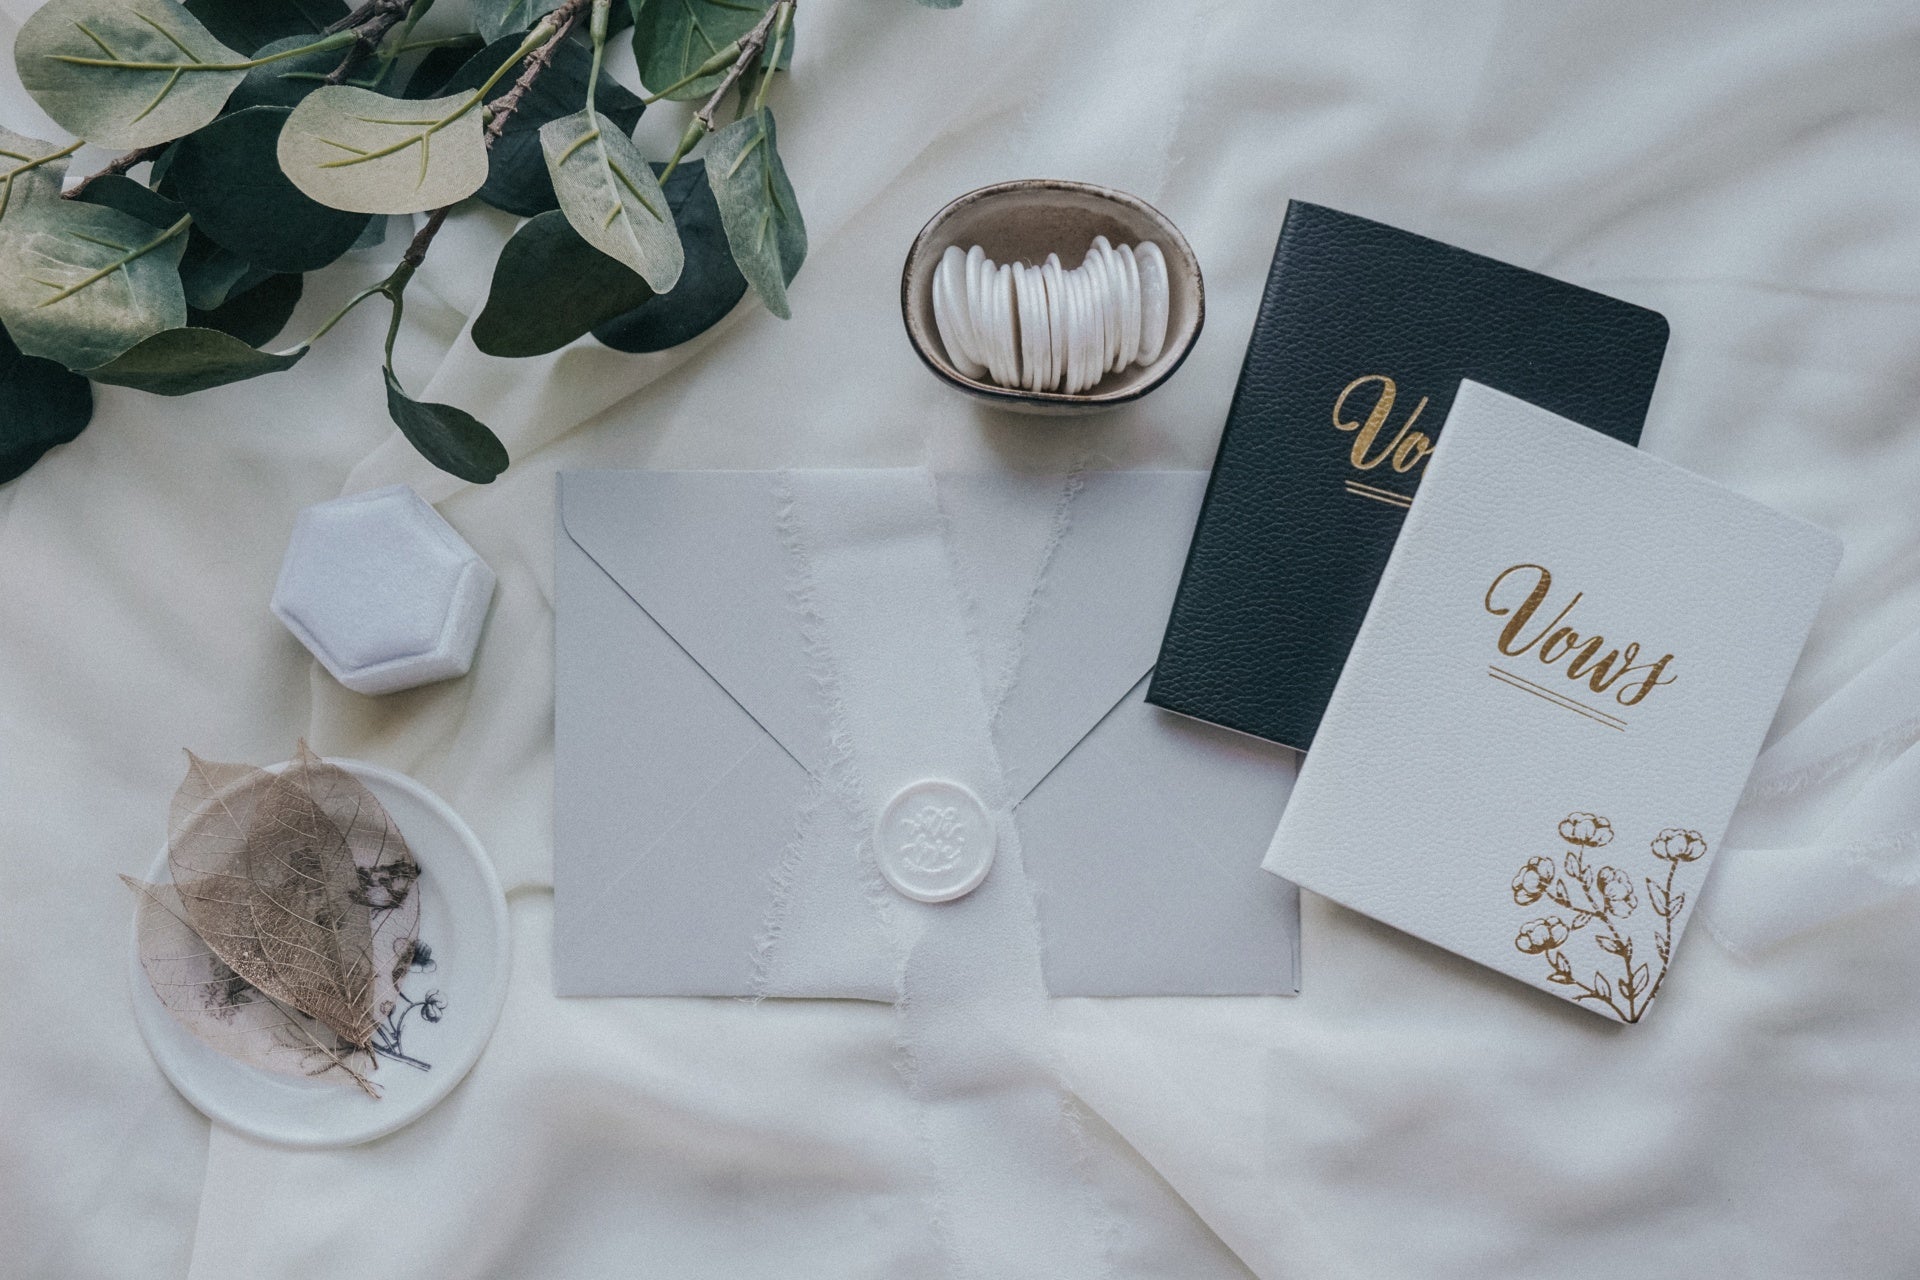 with_love-wax_seal-Dove_white-wax_seals_in_bowl-envelope-wedding_items_and_botanical_flatlay-background_2 - Made of Honour Co.16184552193b4706ec-1